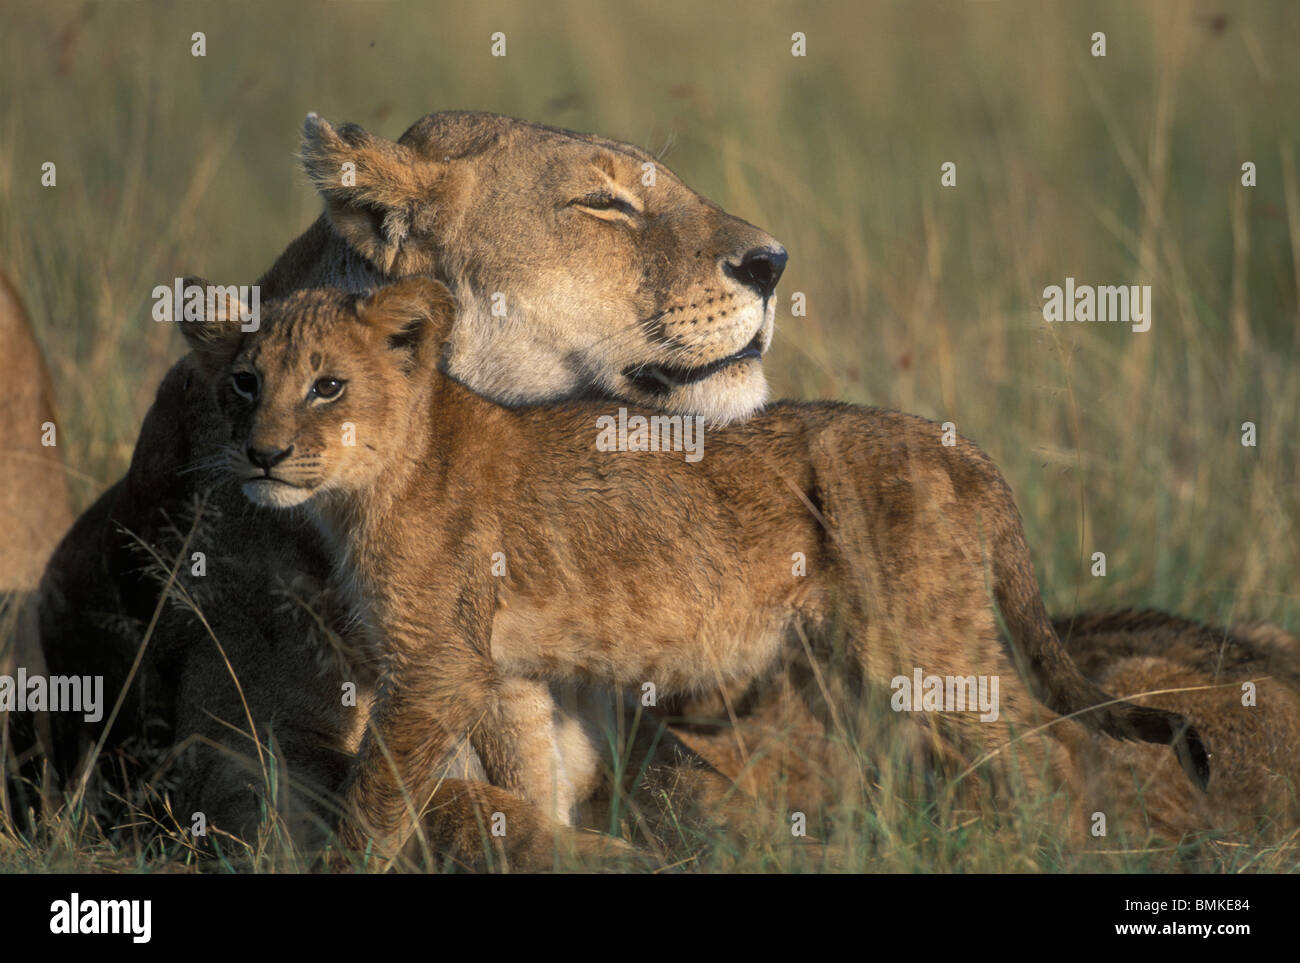 Kenya, Masai Mara Game Reserve, Lioness (Panthera leo) rests with cubs in early morning sun on savanna Stock Photo